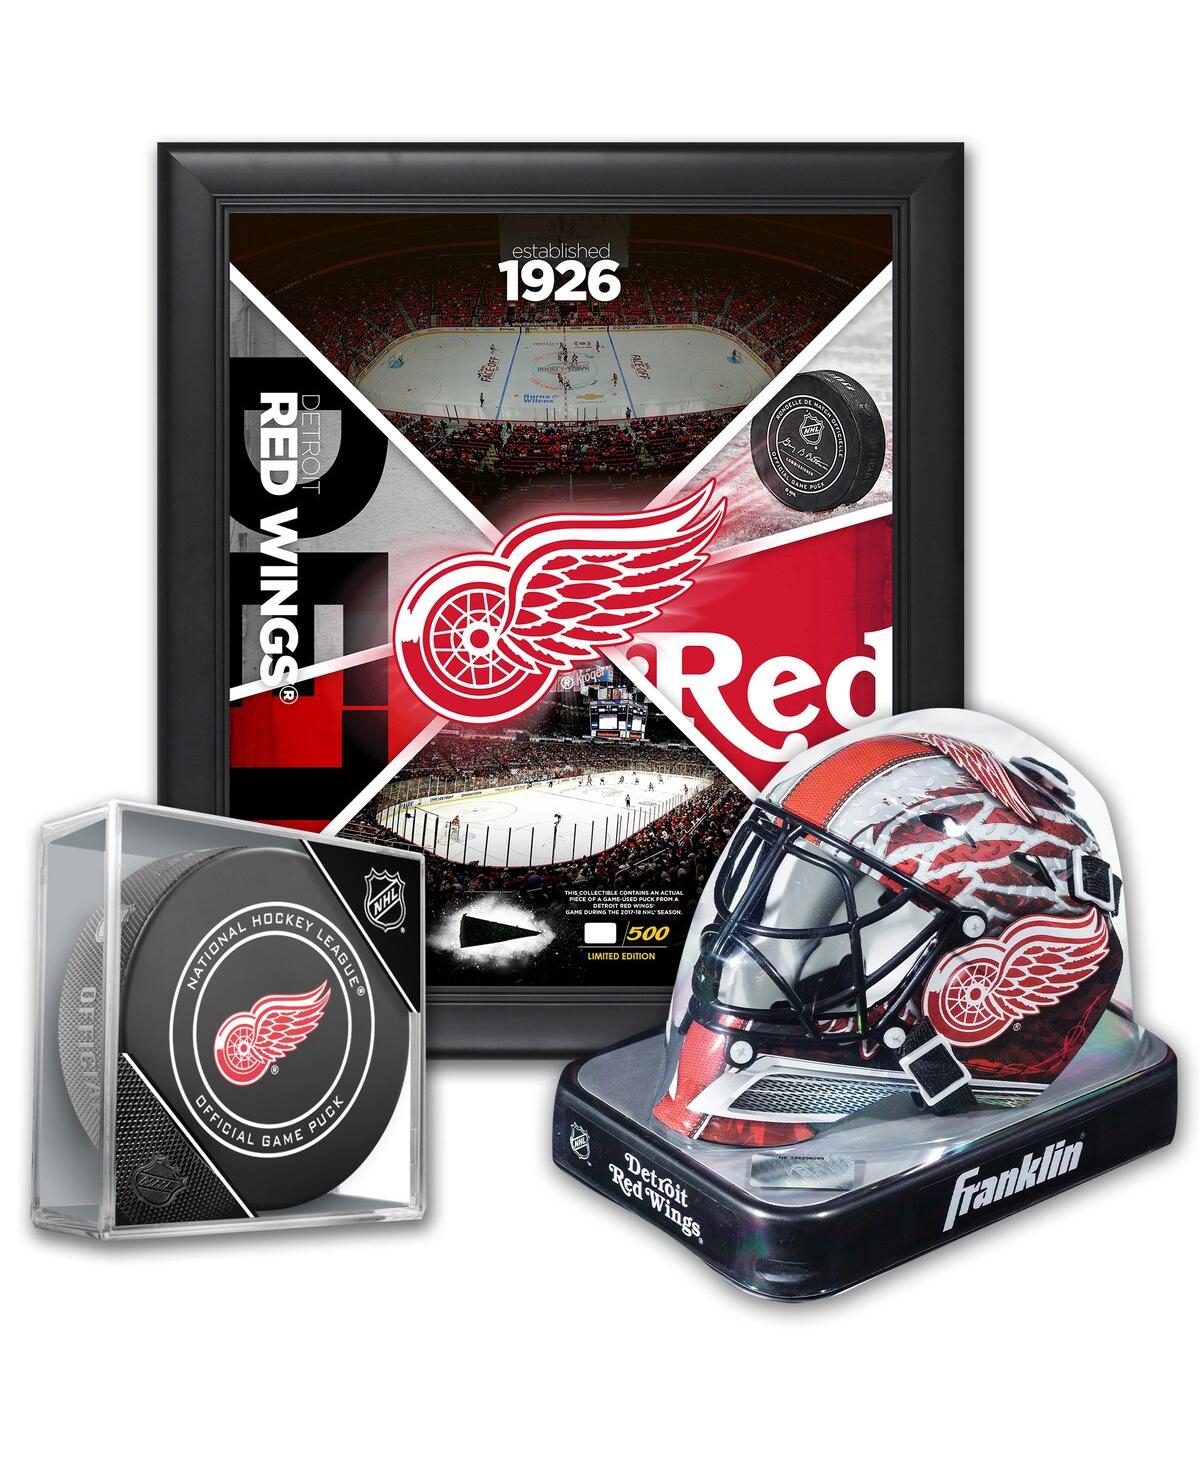 Detroit Red Wings Ultimate Fan Collectibles Bundle - Includes Team Impact 15" x 17" Frame Mini Goalie Mask and Official Game Puck - Multi